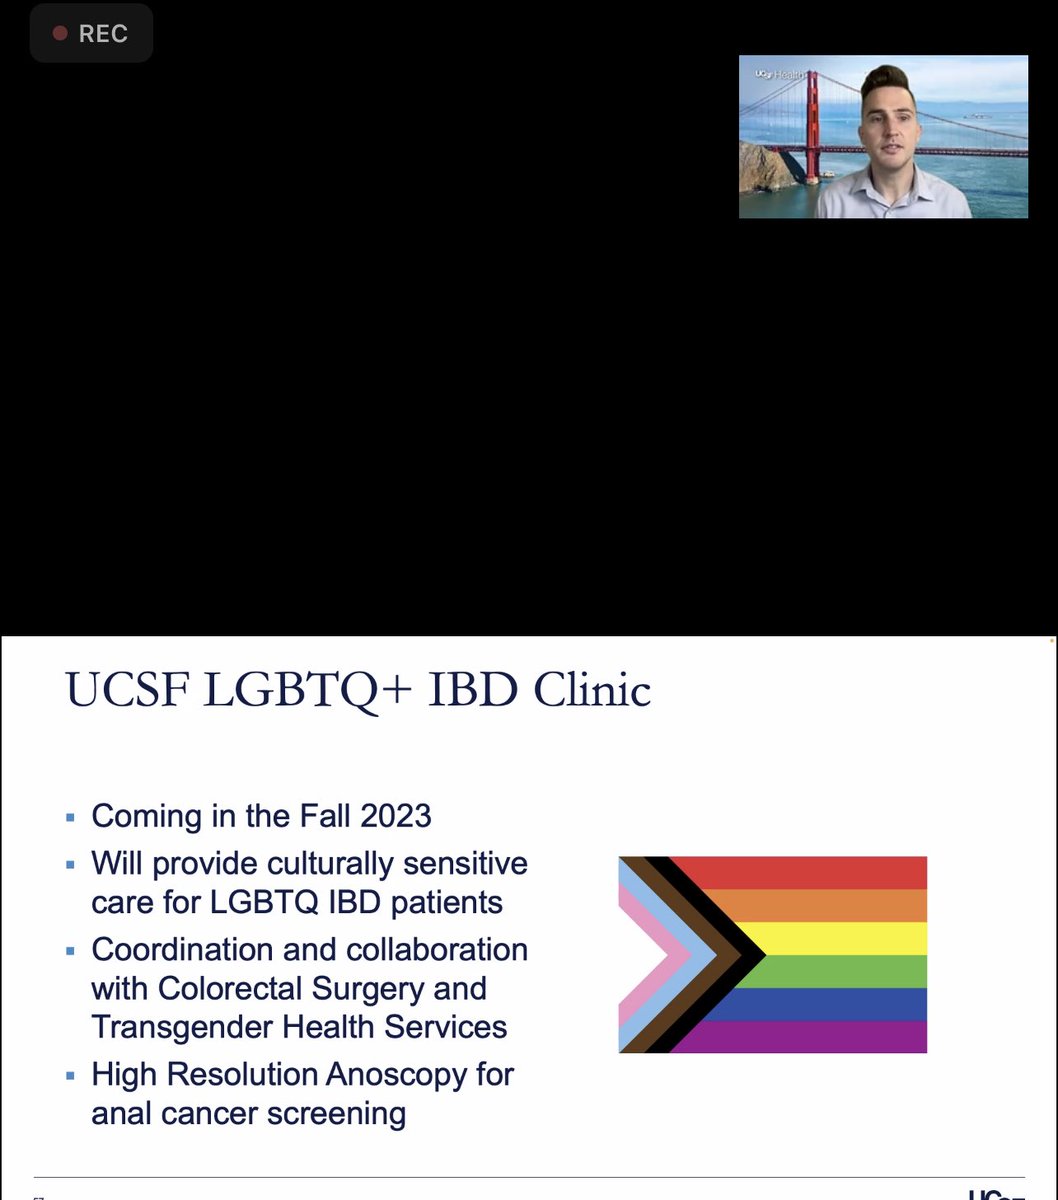 So proud of ⁦@JustinFieldMD⁩ who will be joining the ⁦@ucsfibd⁩ faculty in September 2023 and starting an LGBTQ+IBD clinic! ⁦@UCSFHospitals⁩ ⁦@UCSFDOM⁩